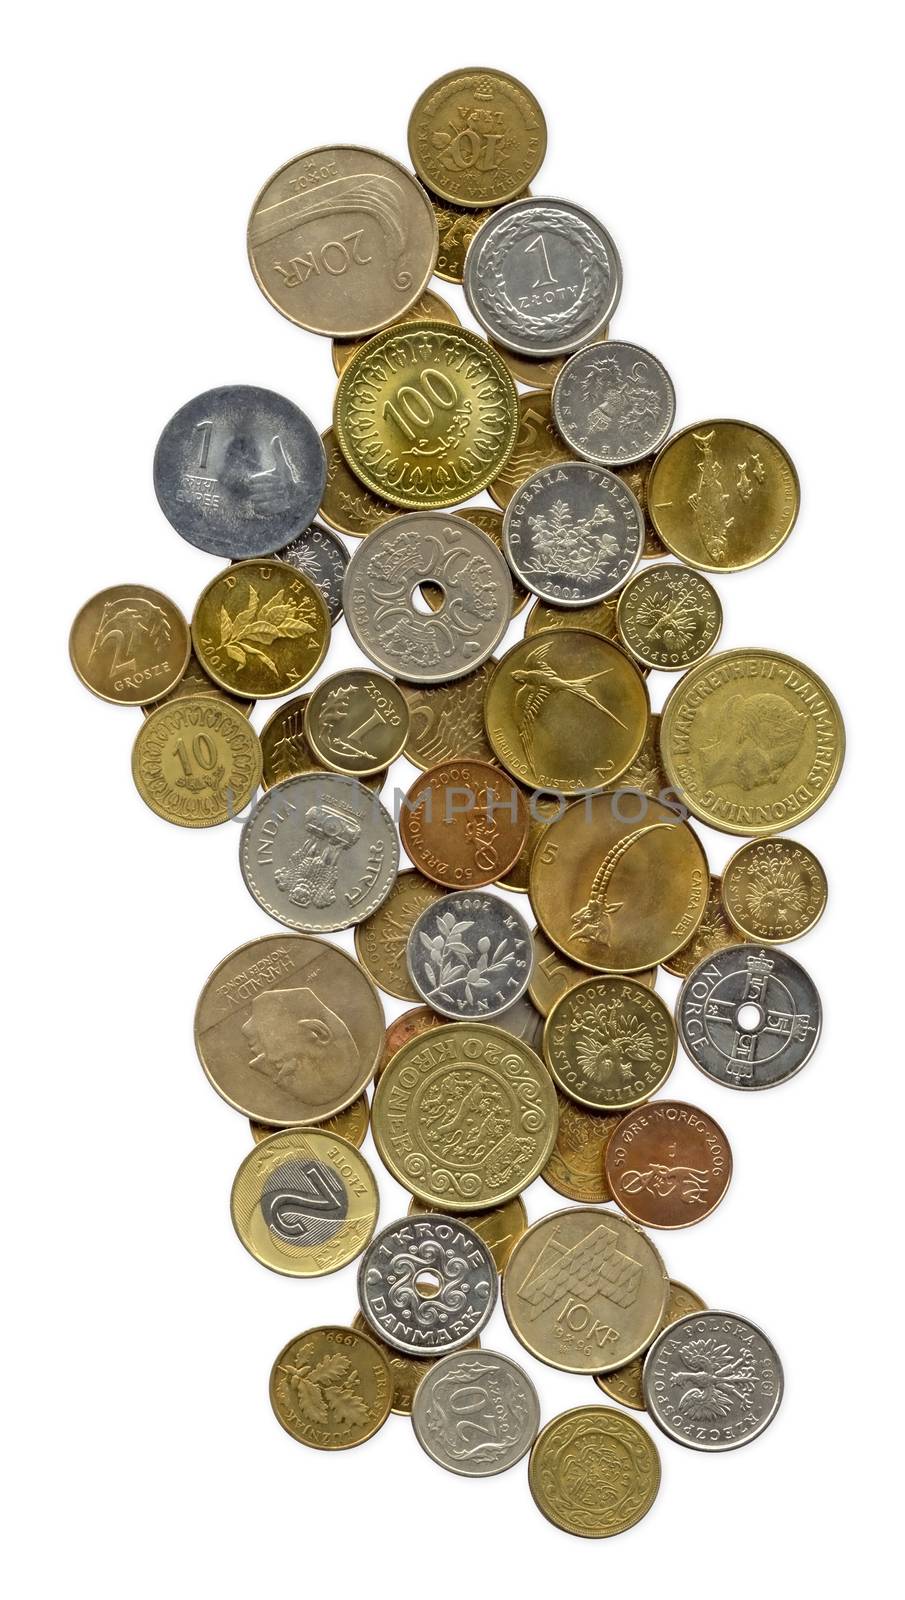 Wonderful collection of coins by fotoecho